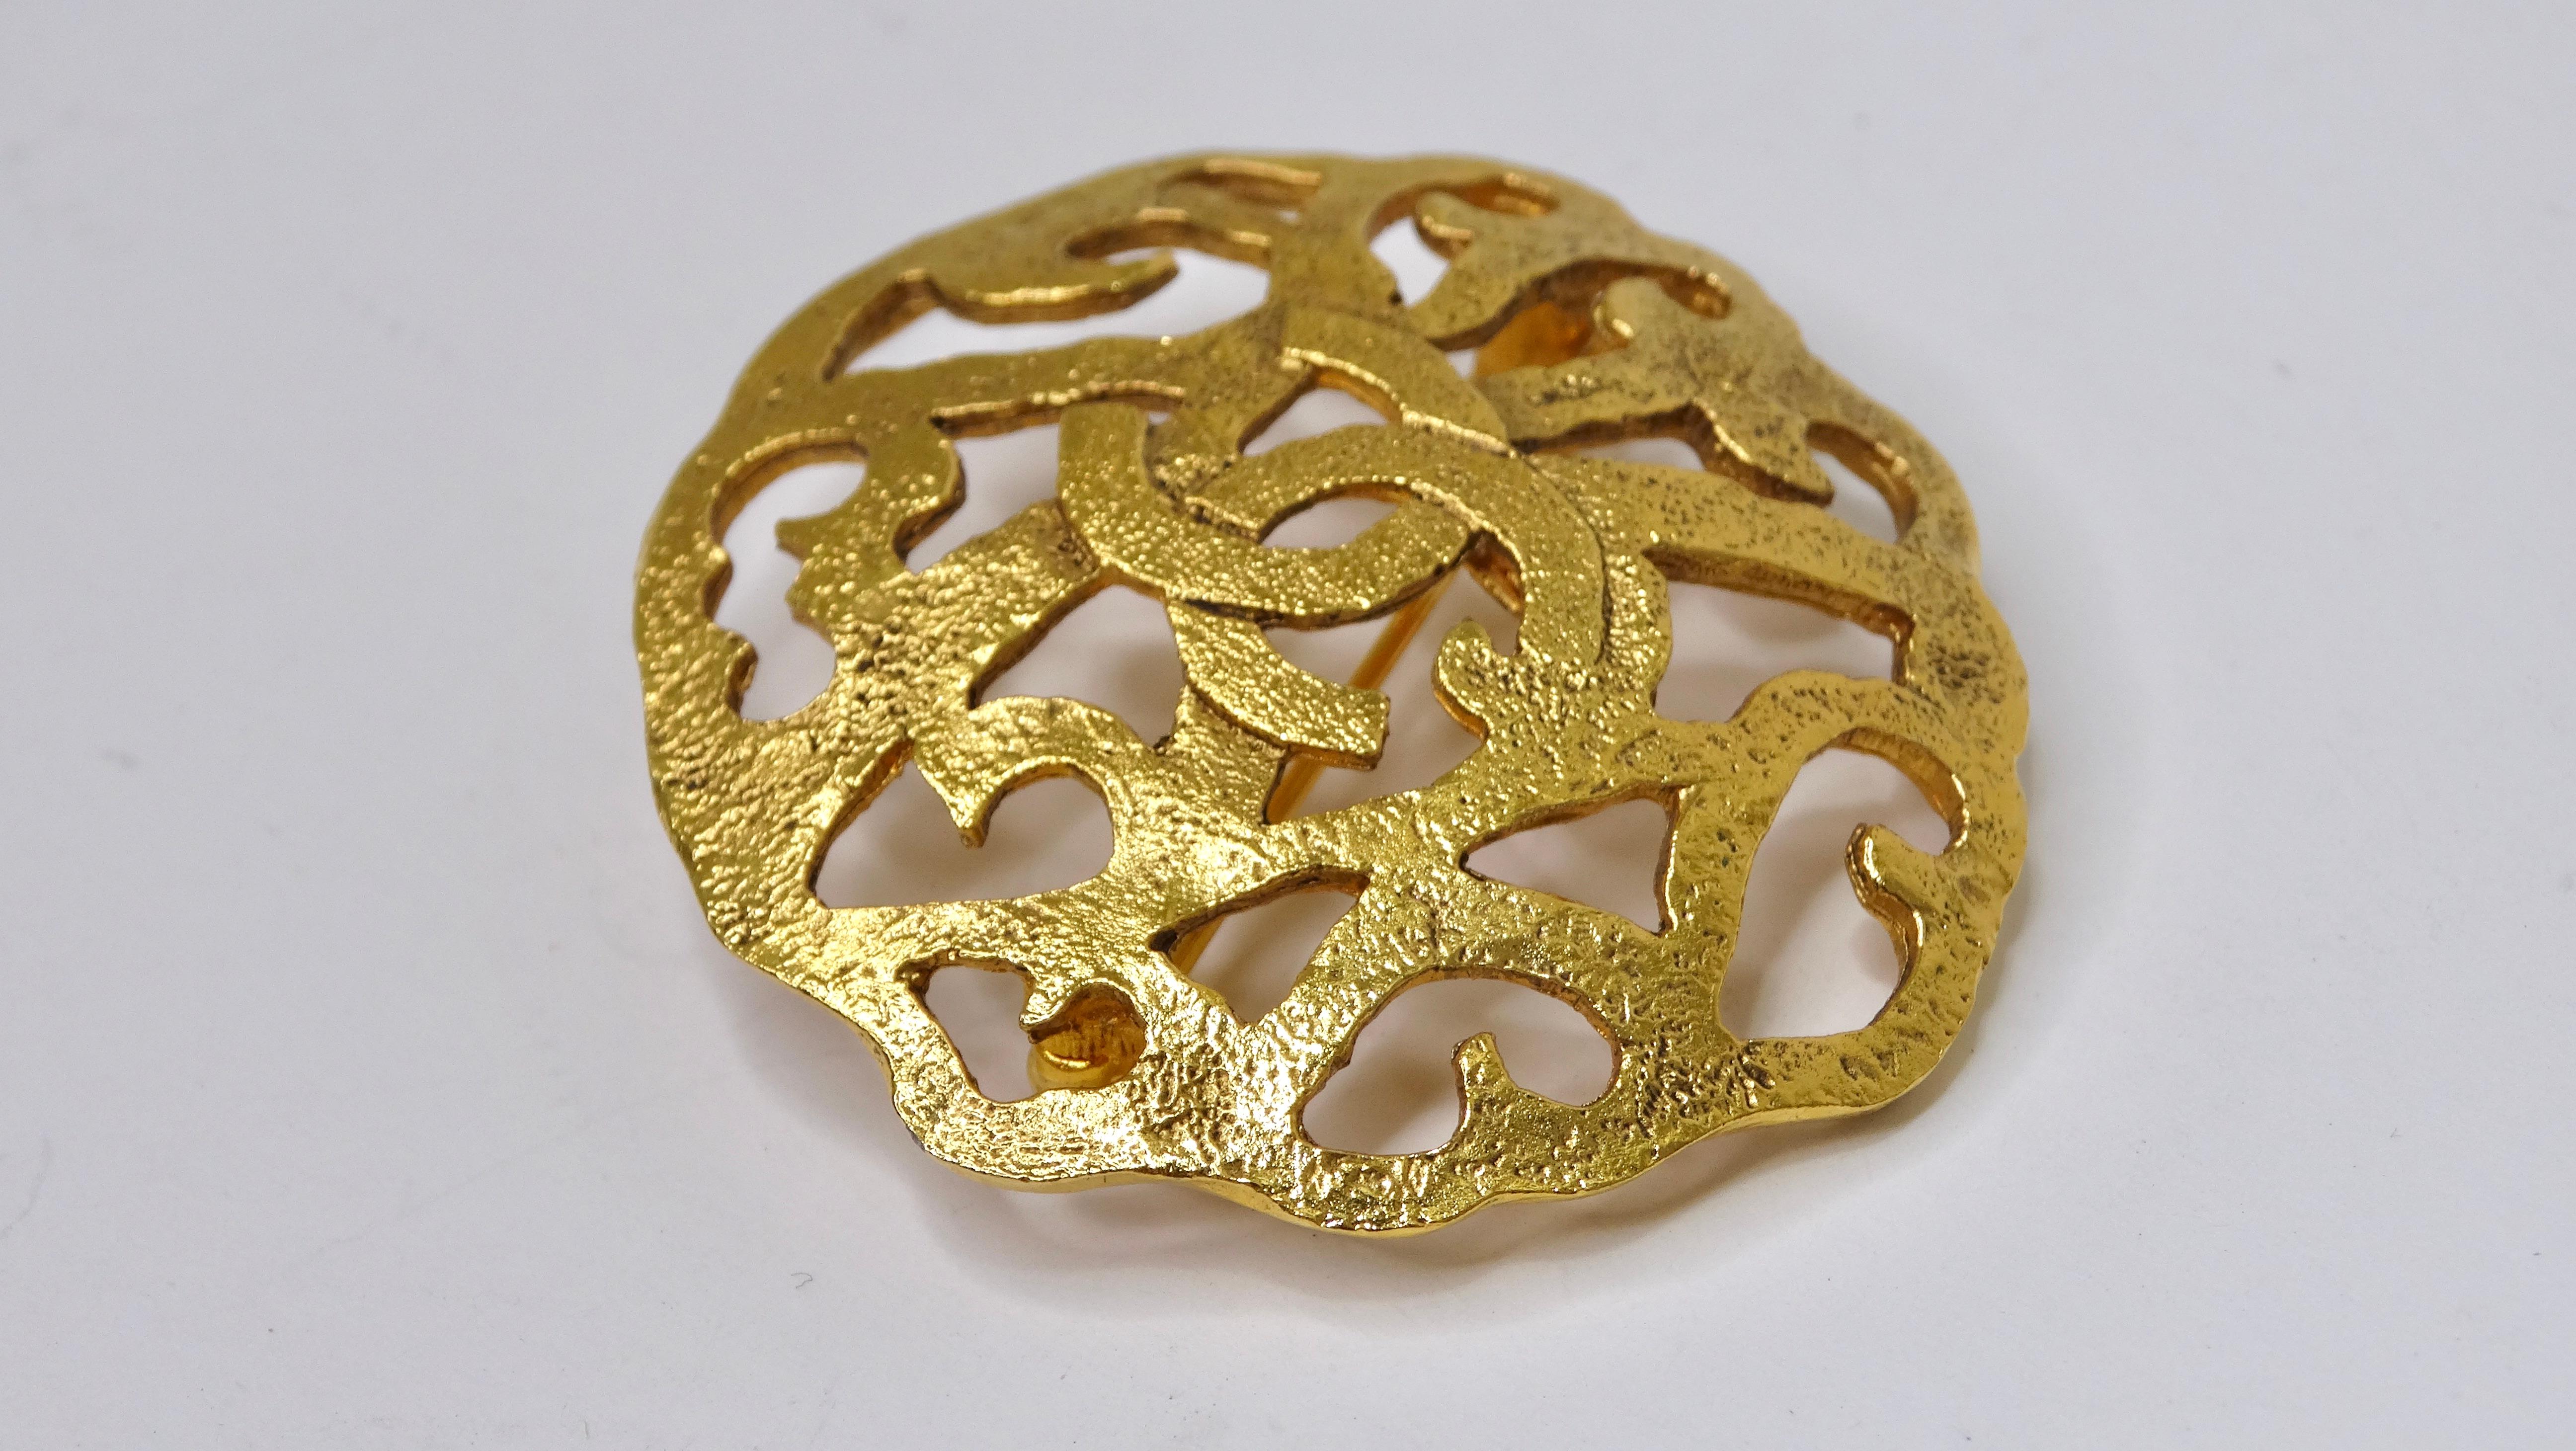 Chanel by Karl Lagerfeld 1980's Brooch In Good Condition For Sale In Scottsdale, AZ